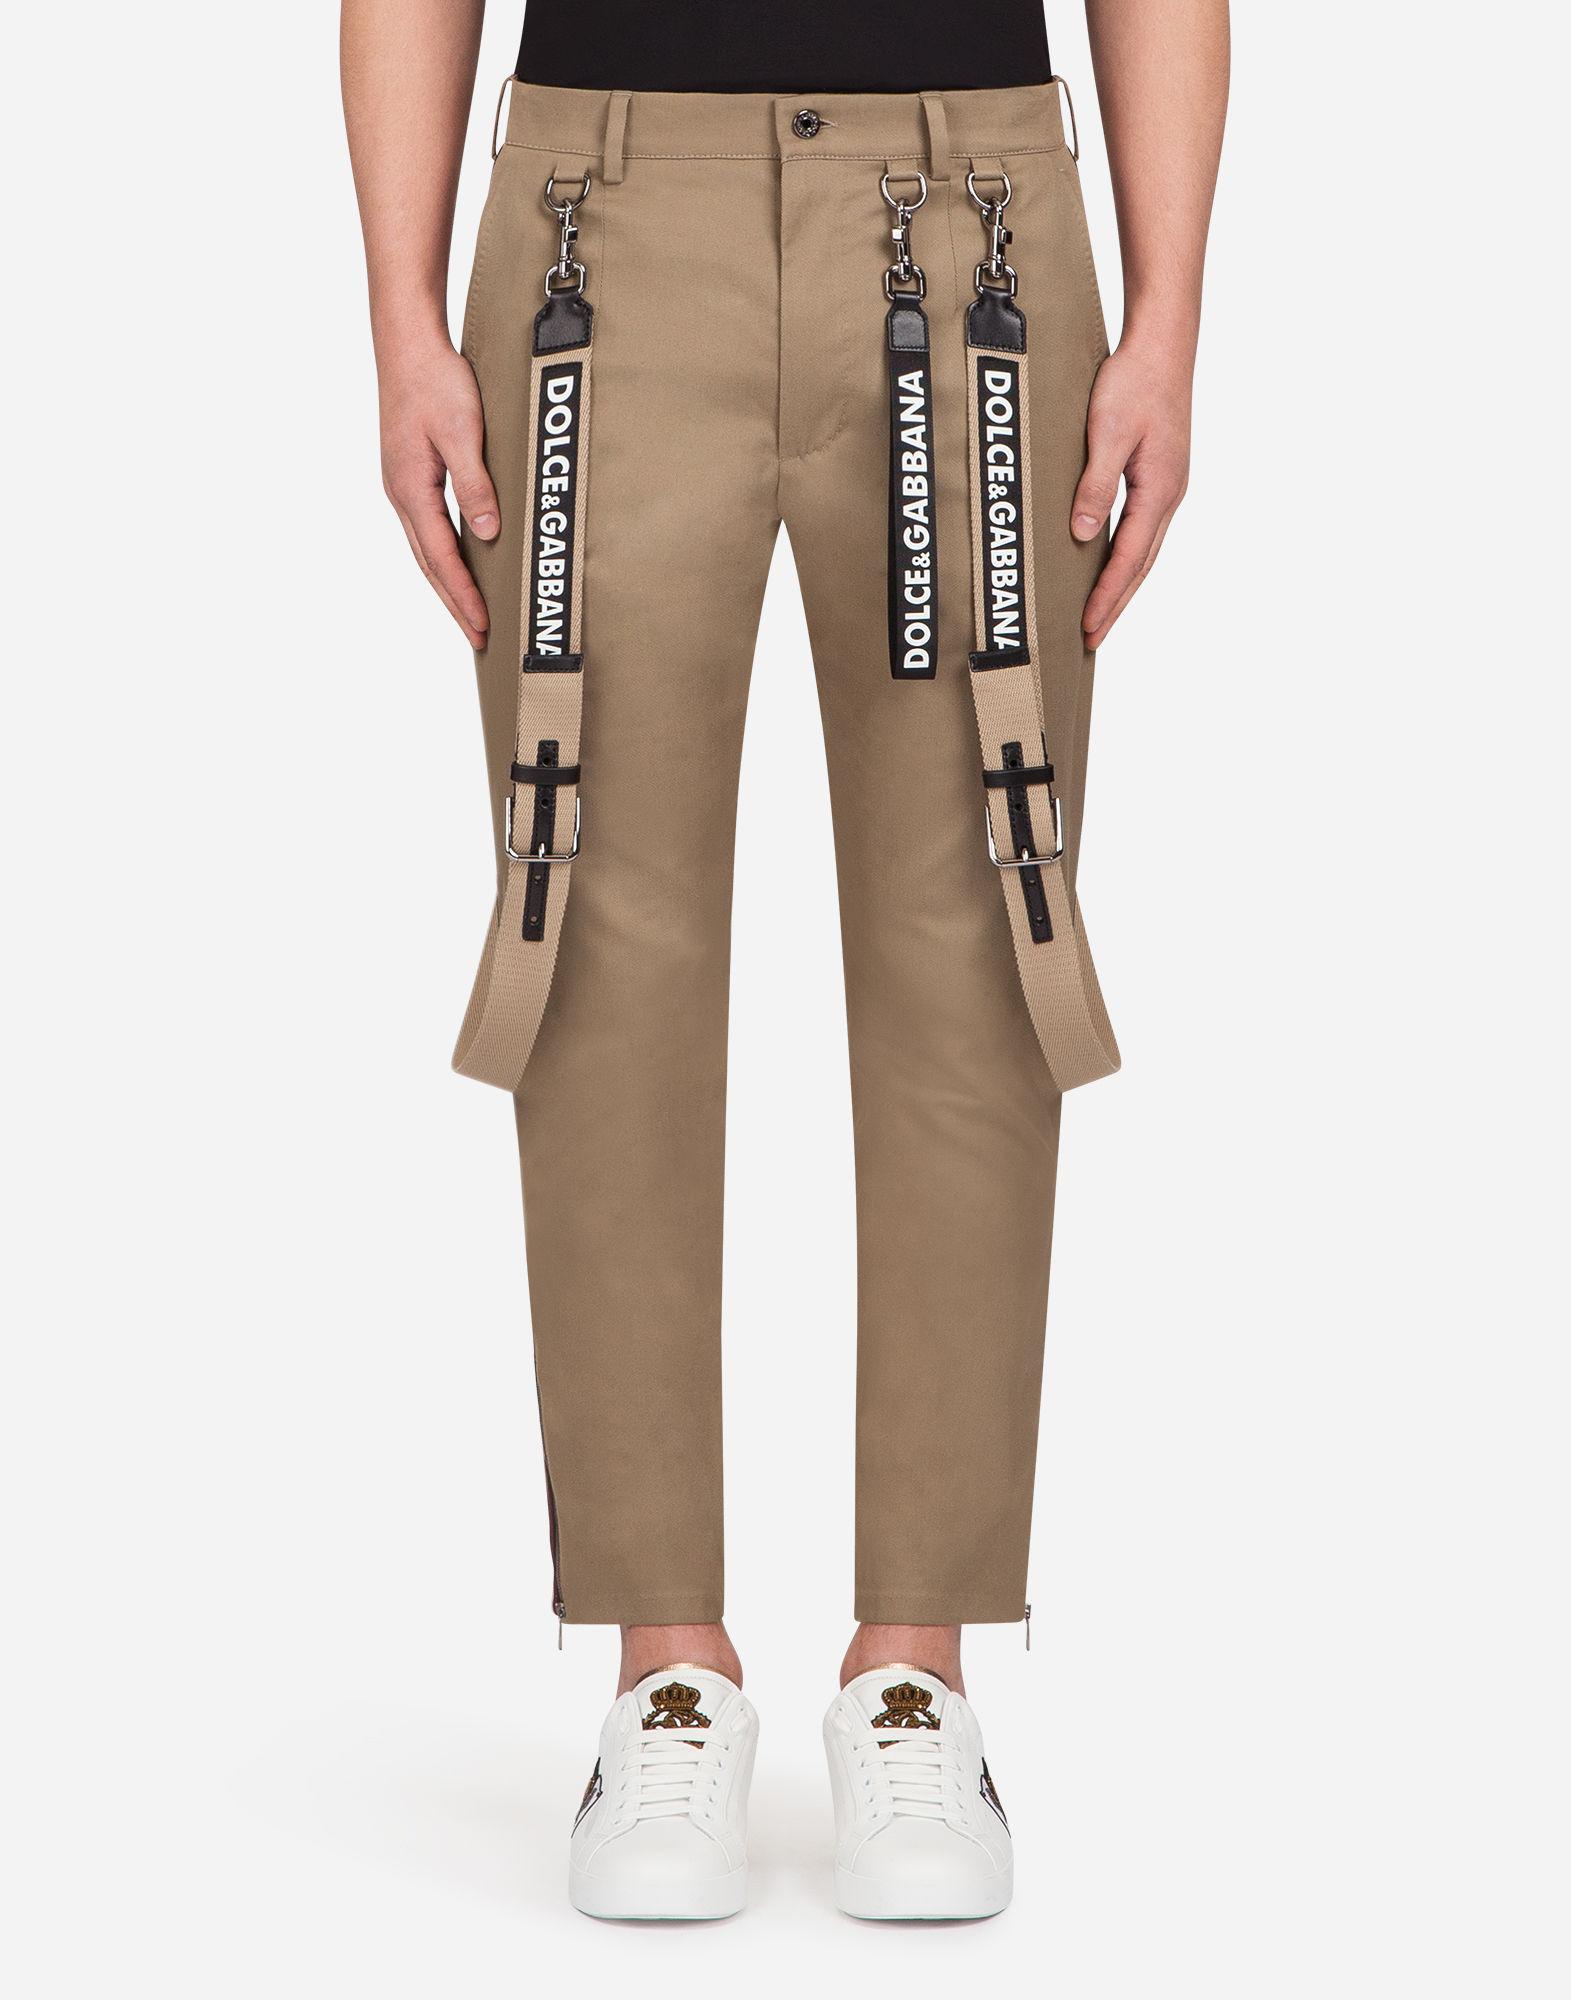 Dolce & Gabbana Pants In Stretch Cotton With Stripes And Suspenders in  Beige (Natural) for Men - Lyst